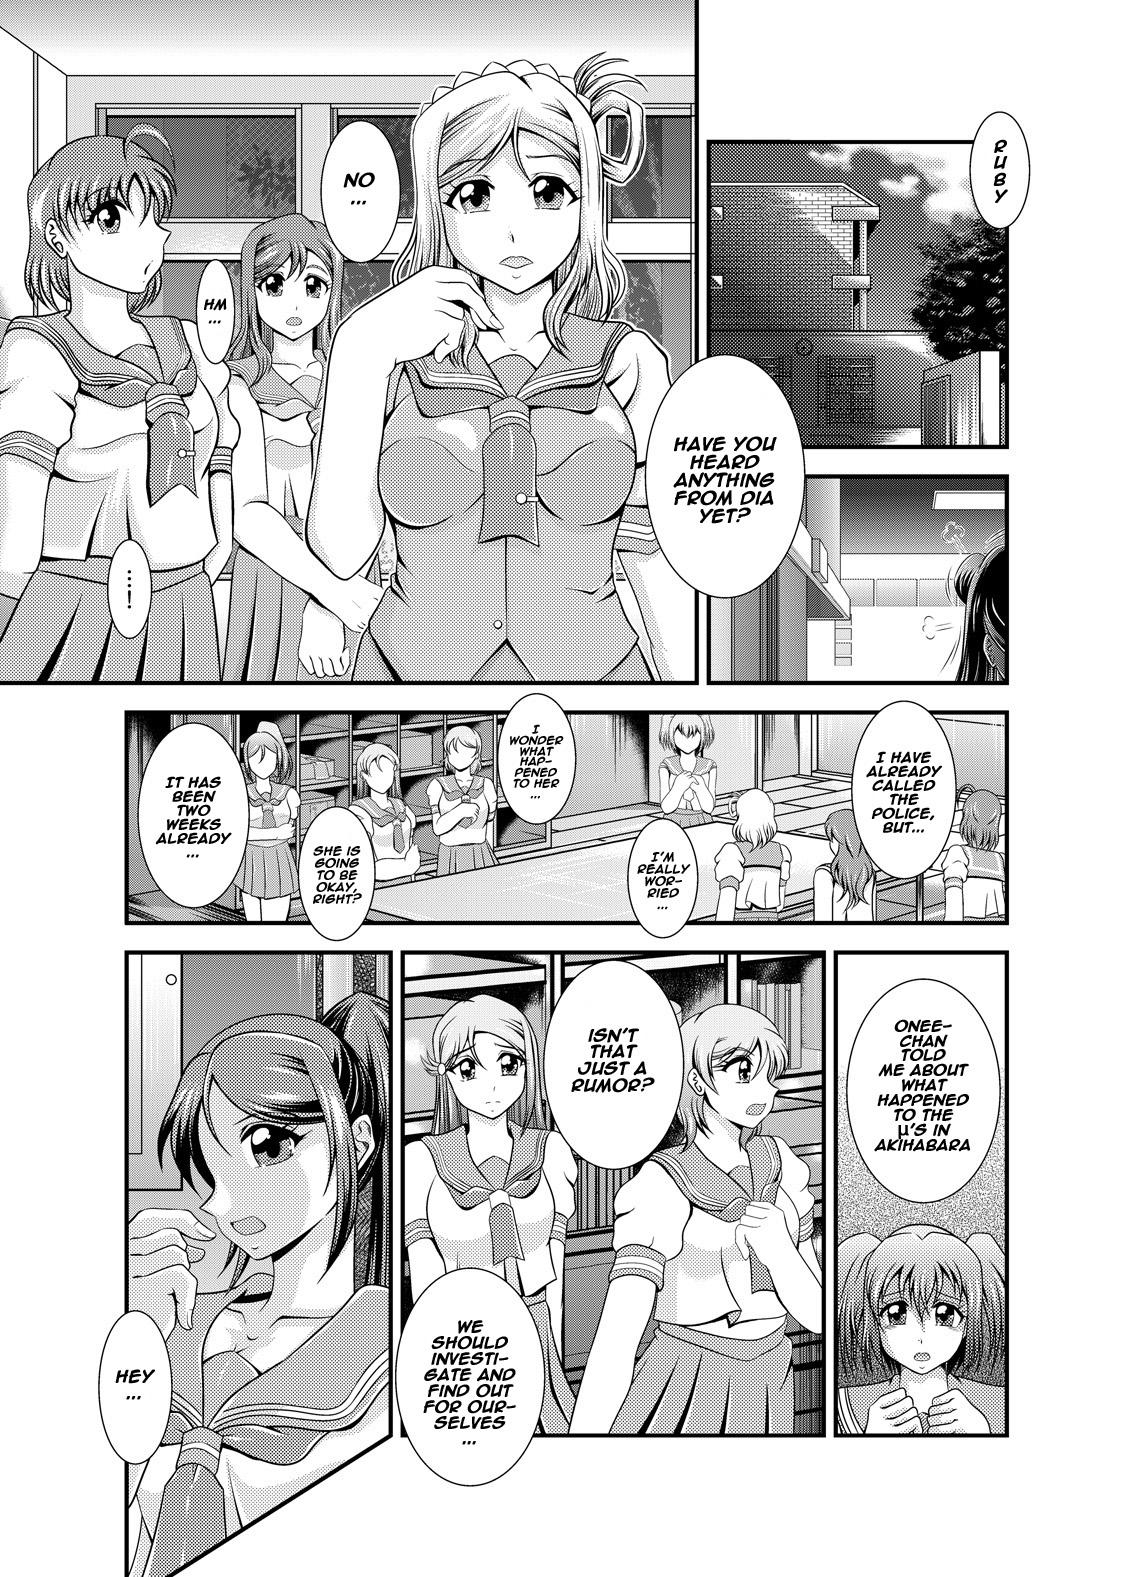 First Time ProjectAqours EP01DIAMONDS - Love live sunshine Fucking - Page 3